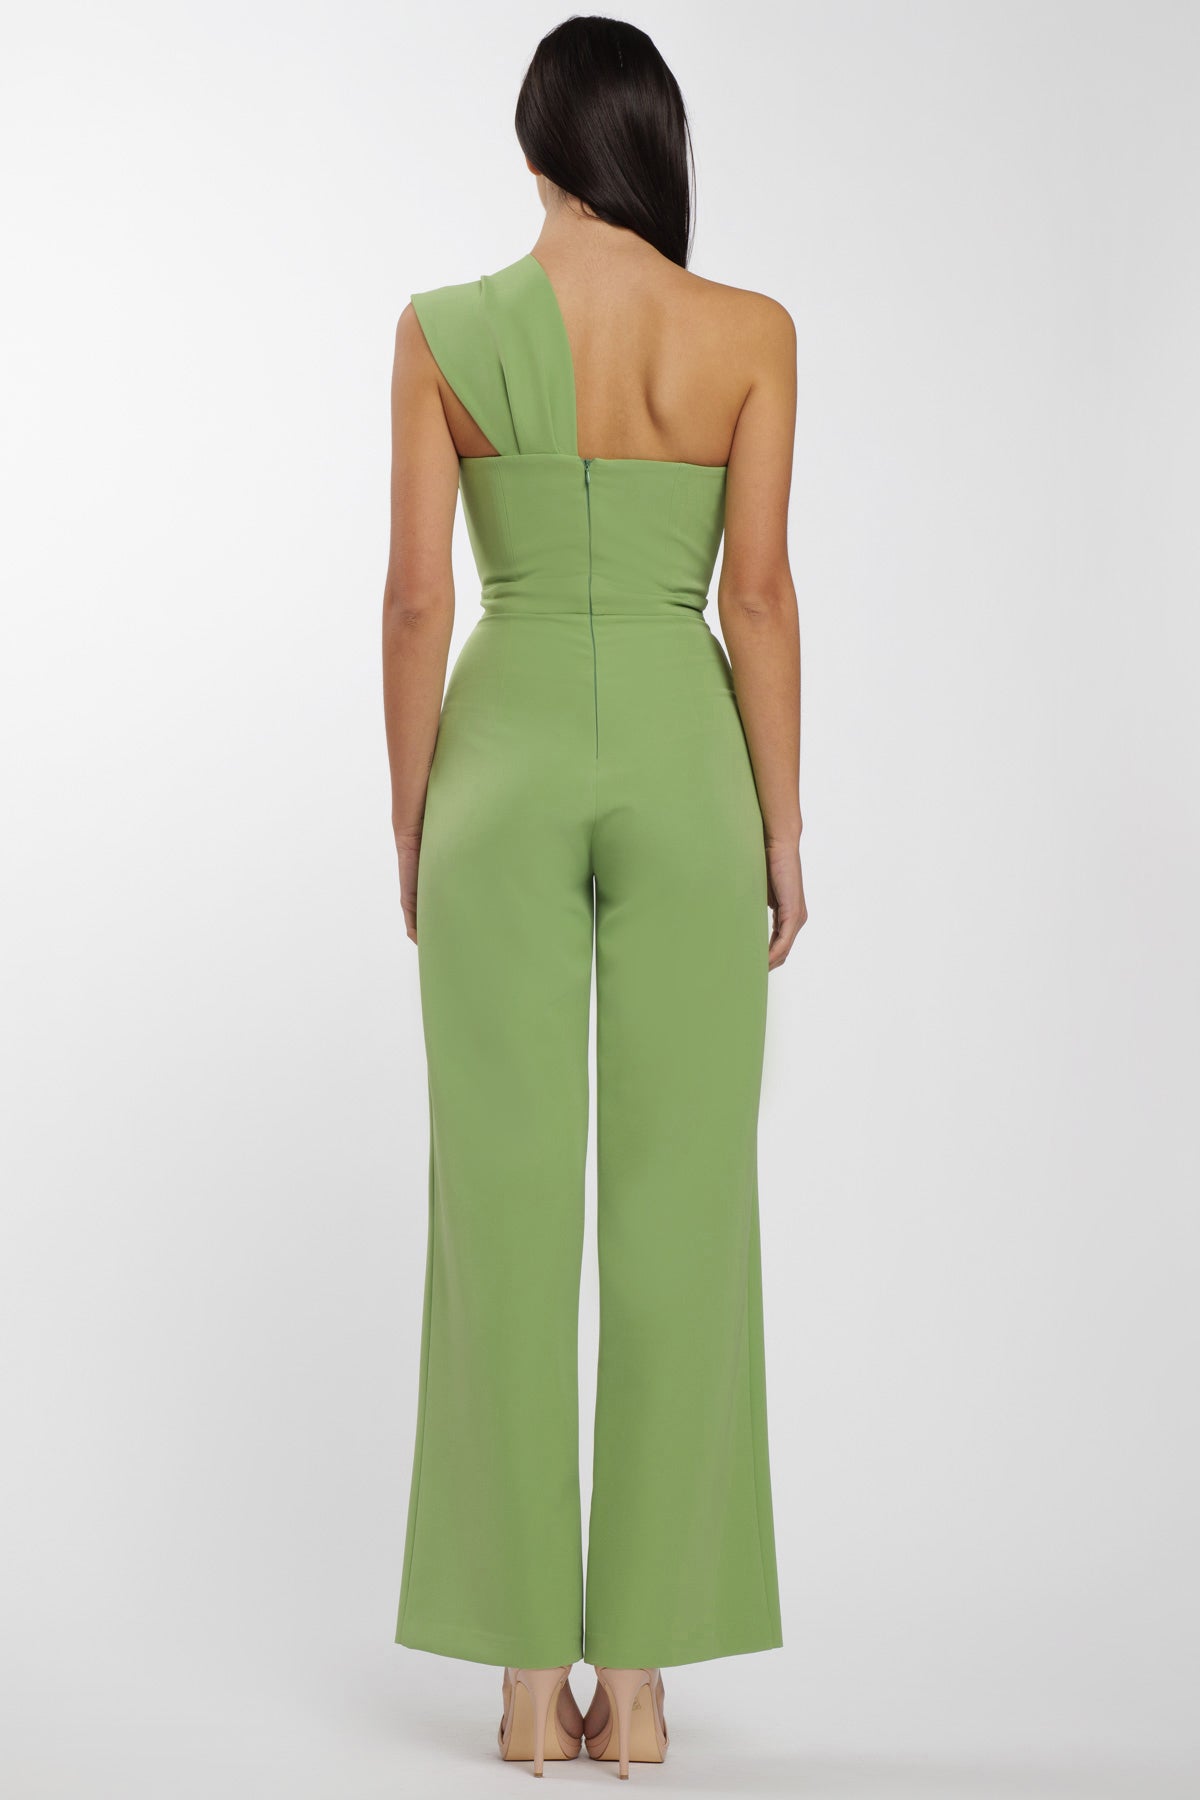 Jumpsuit Candy Avocado